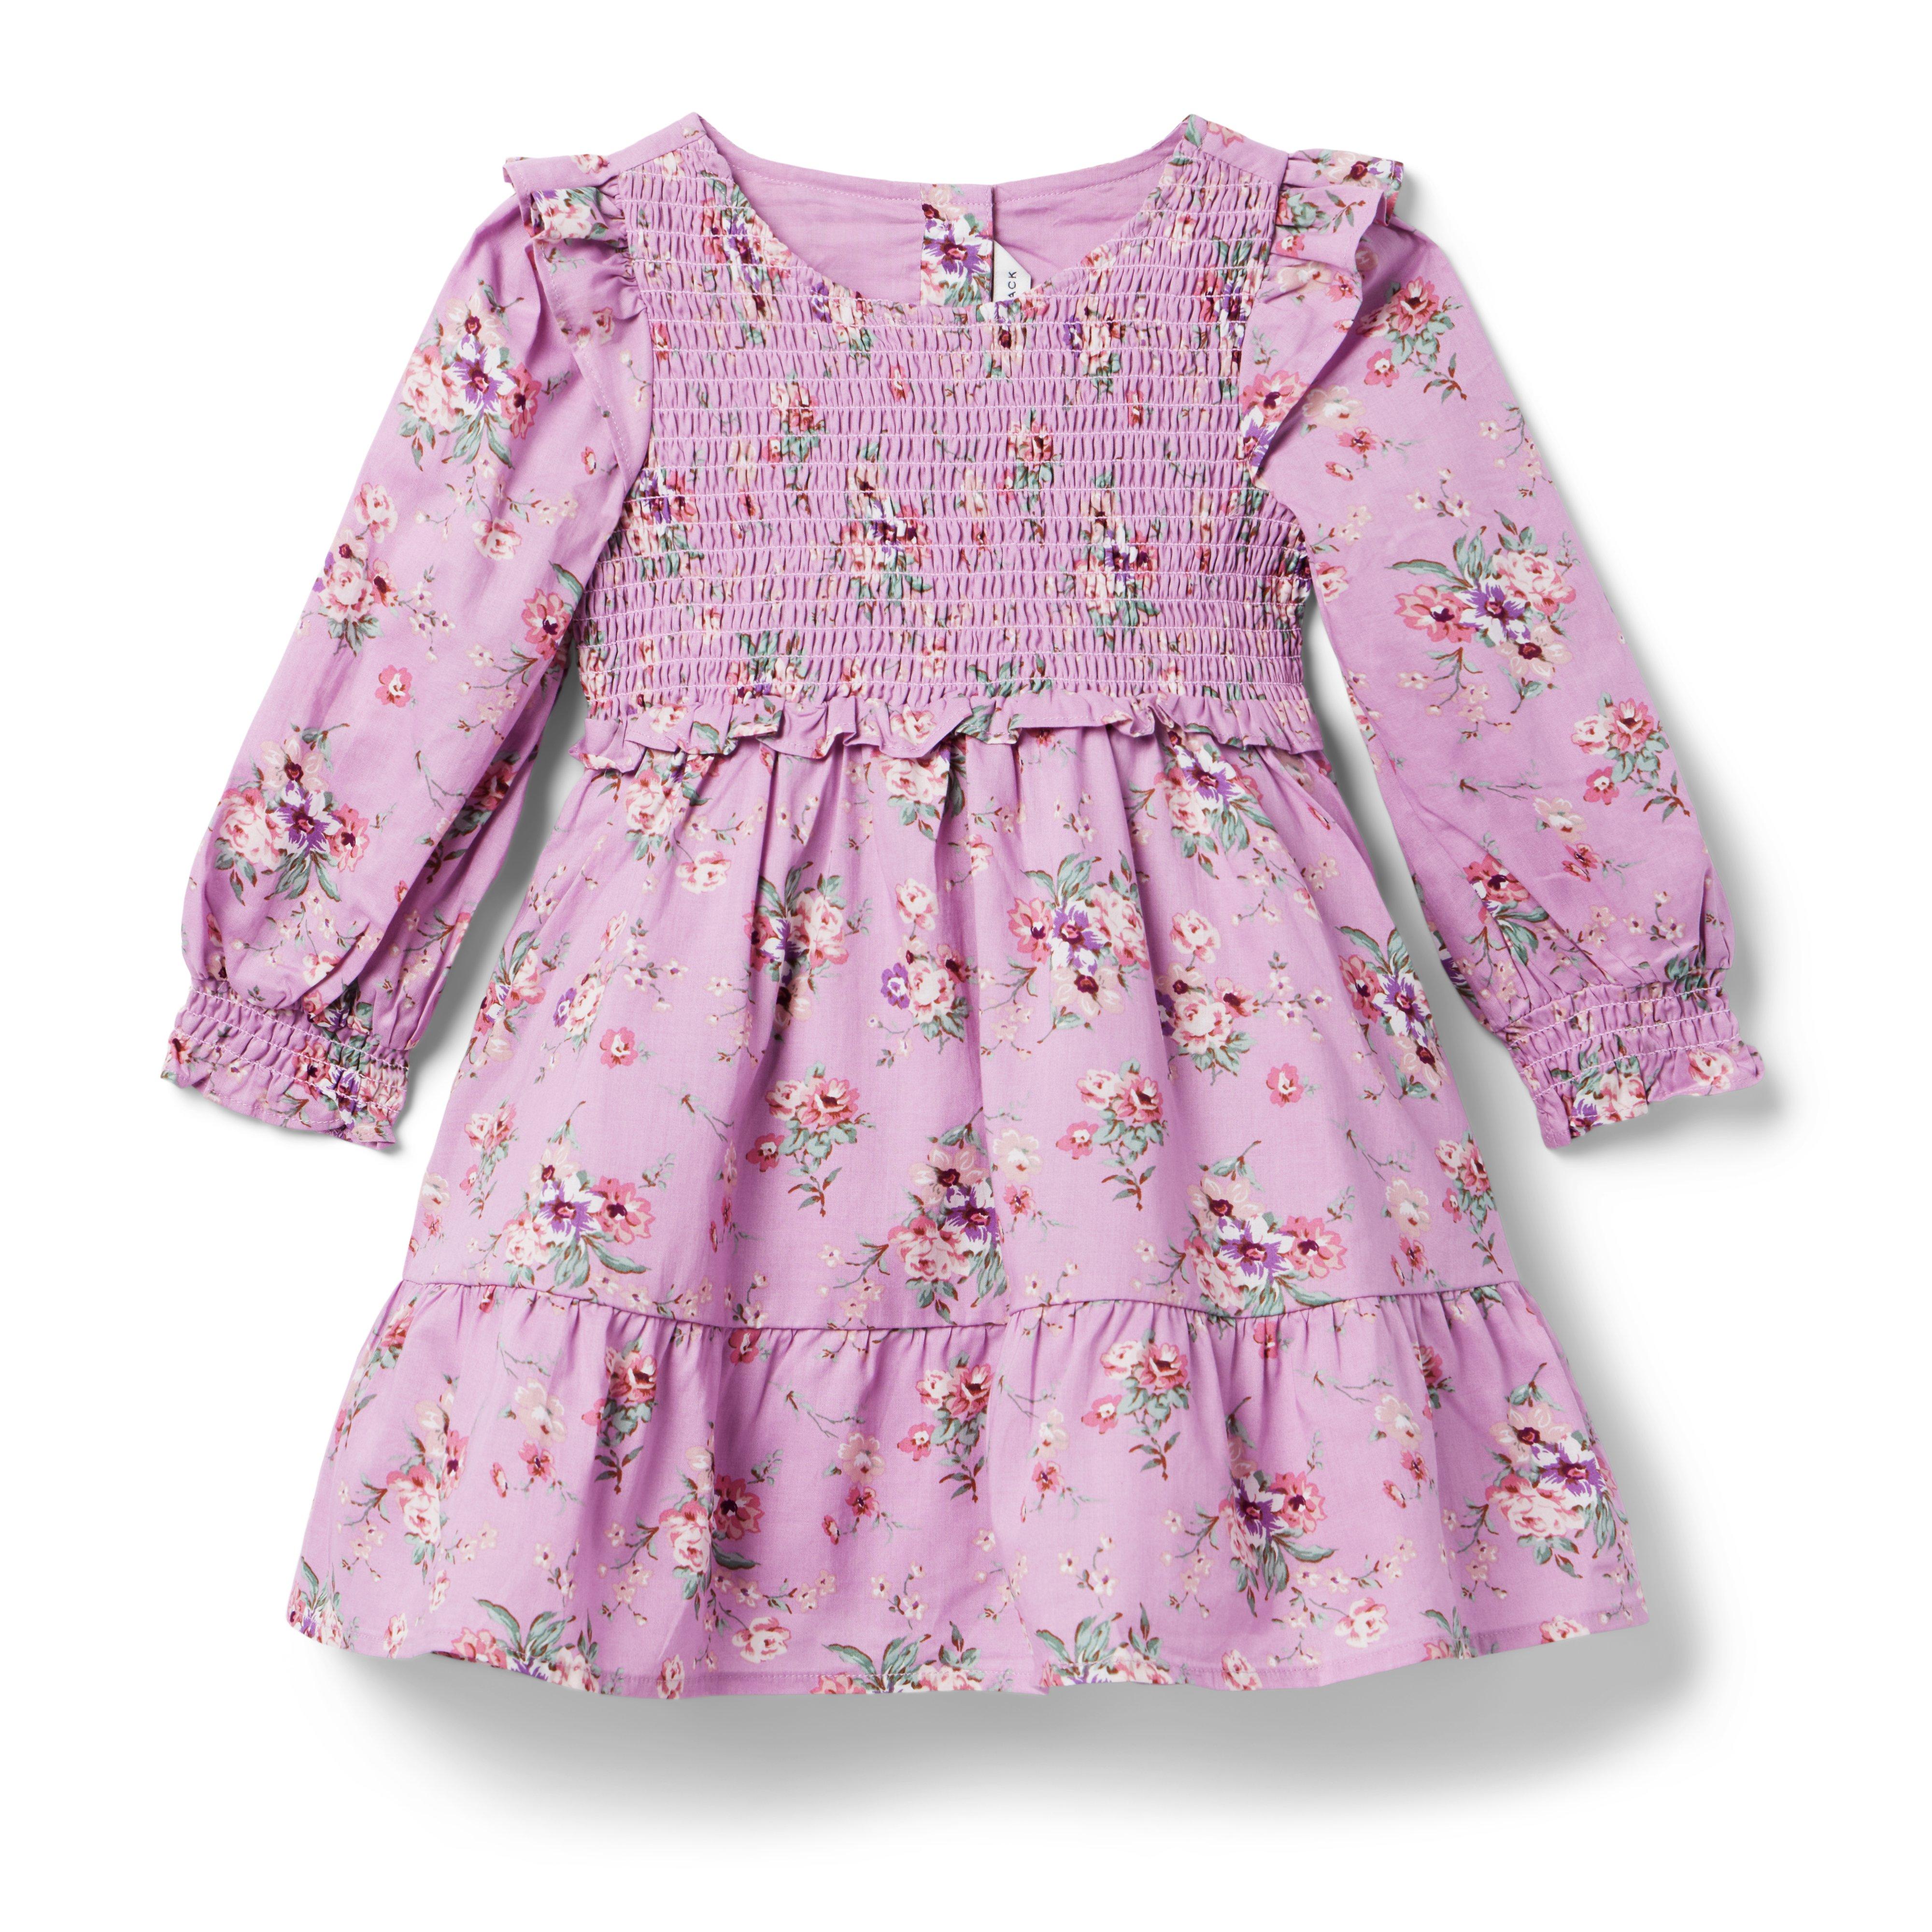 Girl Lavender Herb Floral The Eloise Smocked Dress by Janie and Jack